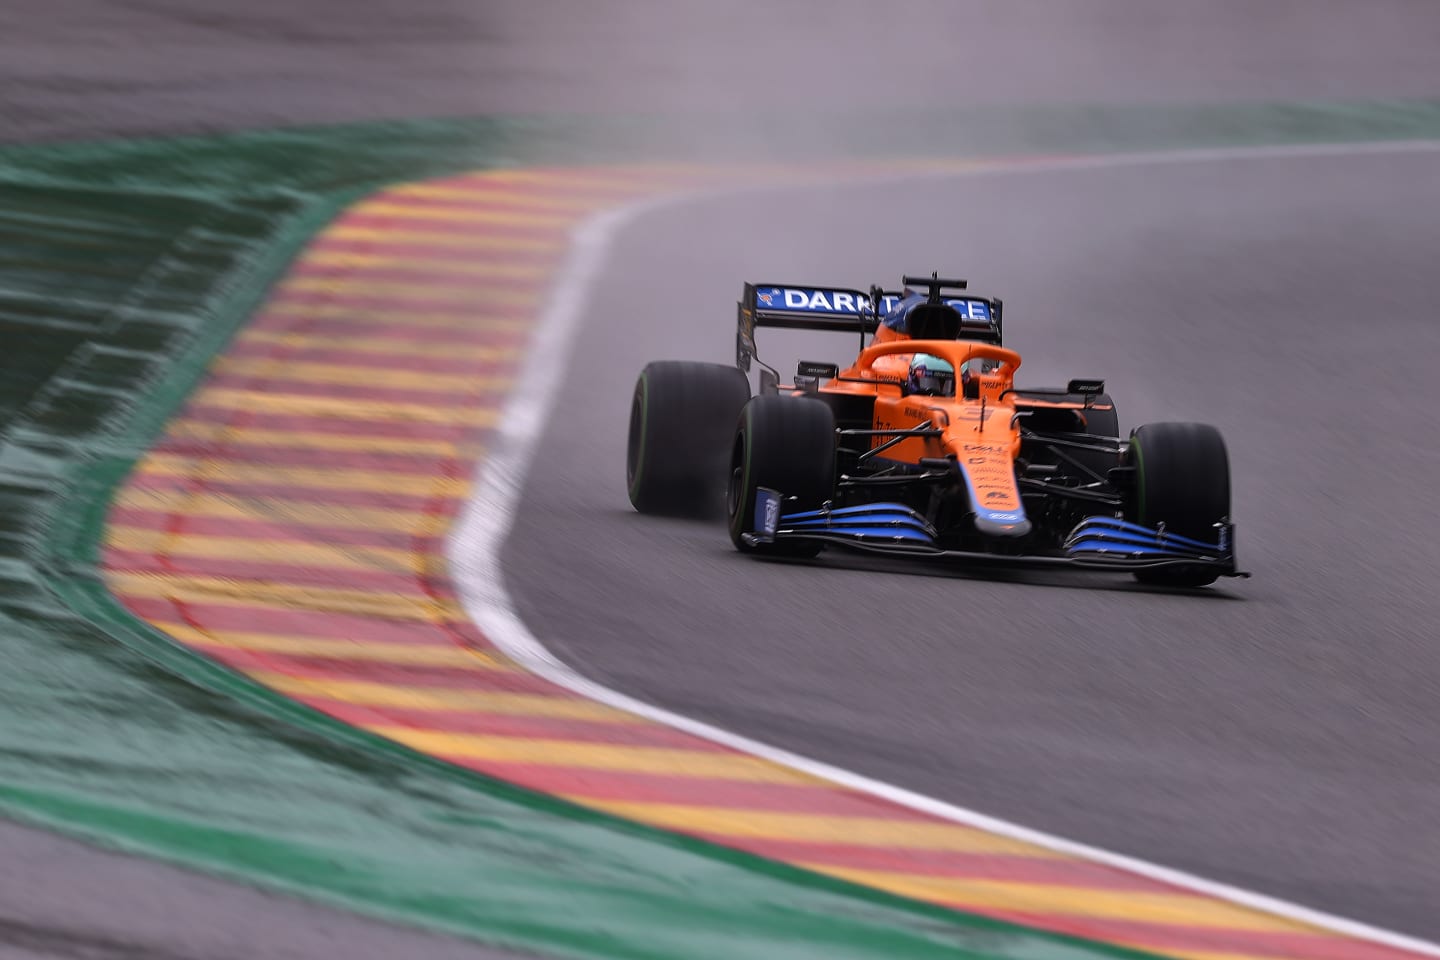 SPA, BELGIUM - AUGUST 28: Daniel Ricciardo of Australia driving the (3) McLaren F1 Team MCL35M Mercedes during qualifying ahead of the F1 Grand Prix of Belgium at Circuit de Spa-Francorchamps on August 28, 2021 in Spa, Belgium. (Photo by Lars Baron/Getty Images)